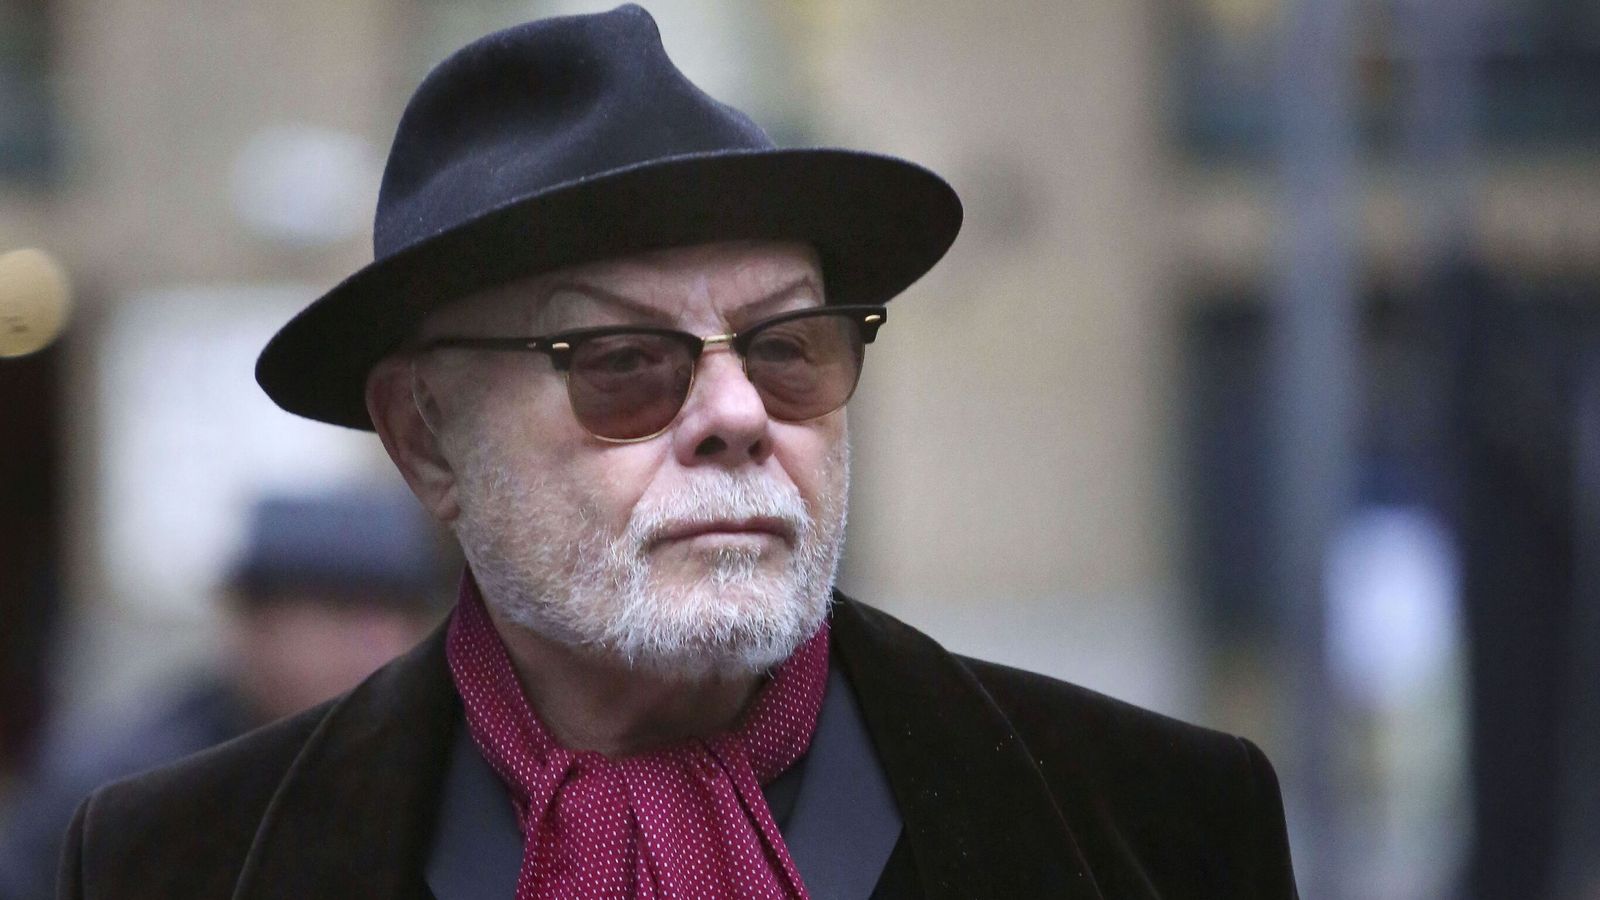 Gary Glitter ordered to pay half a million pounds to woman he abused